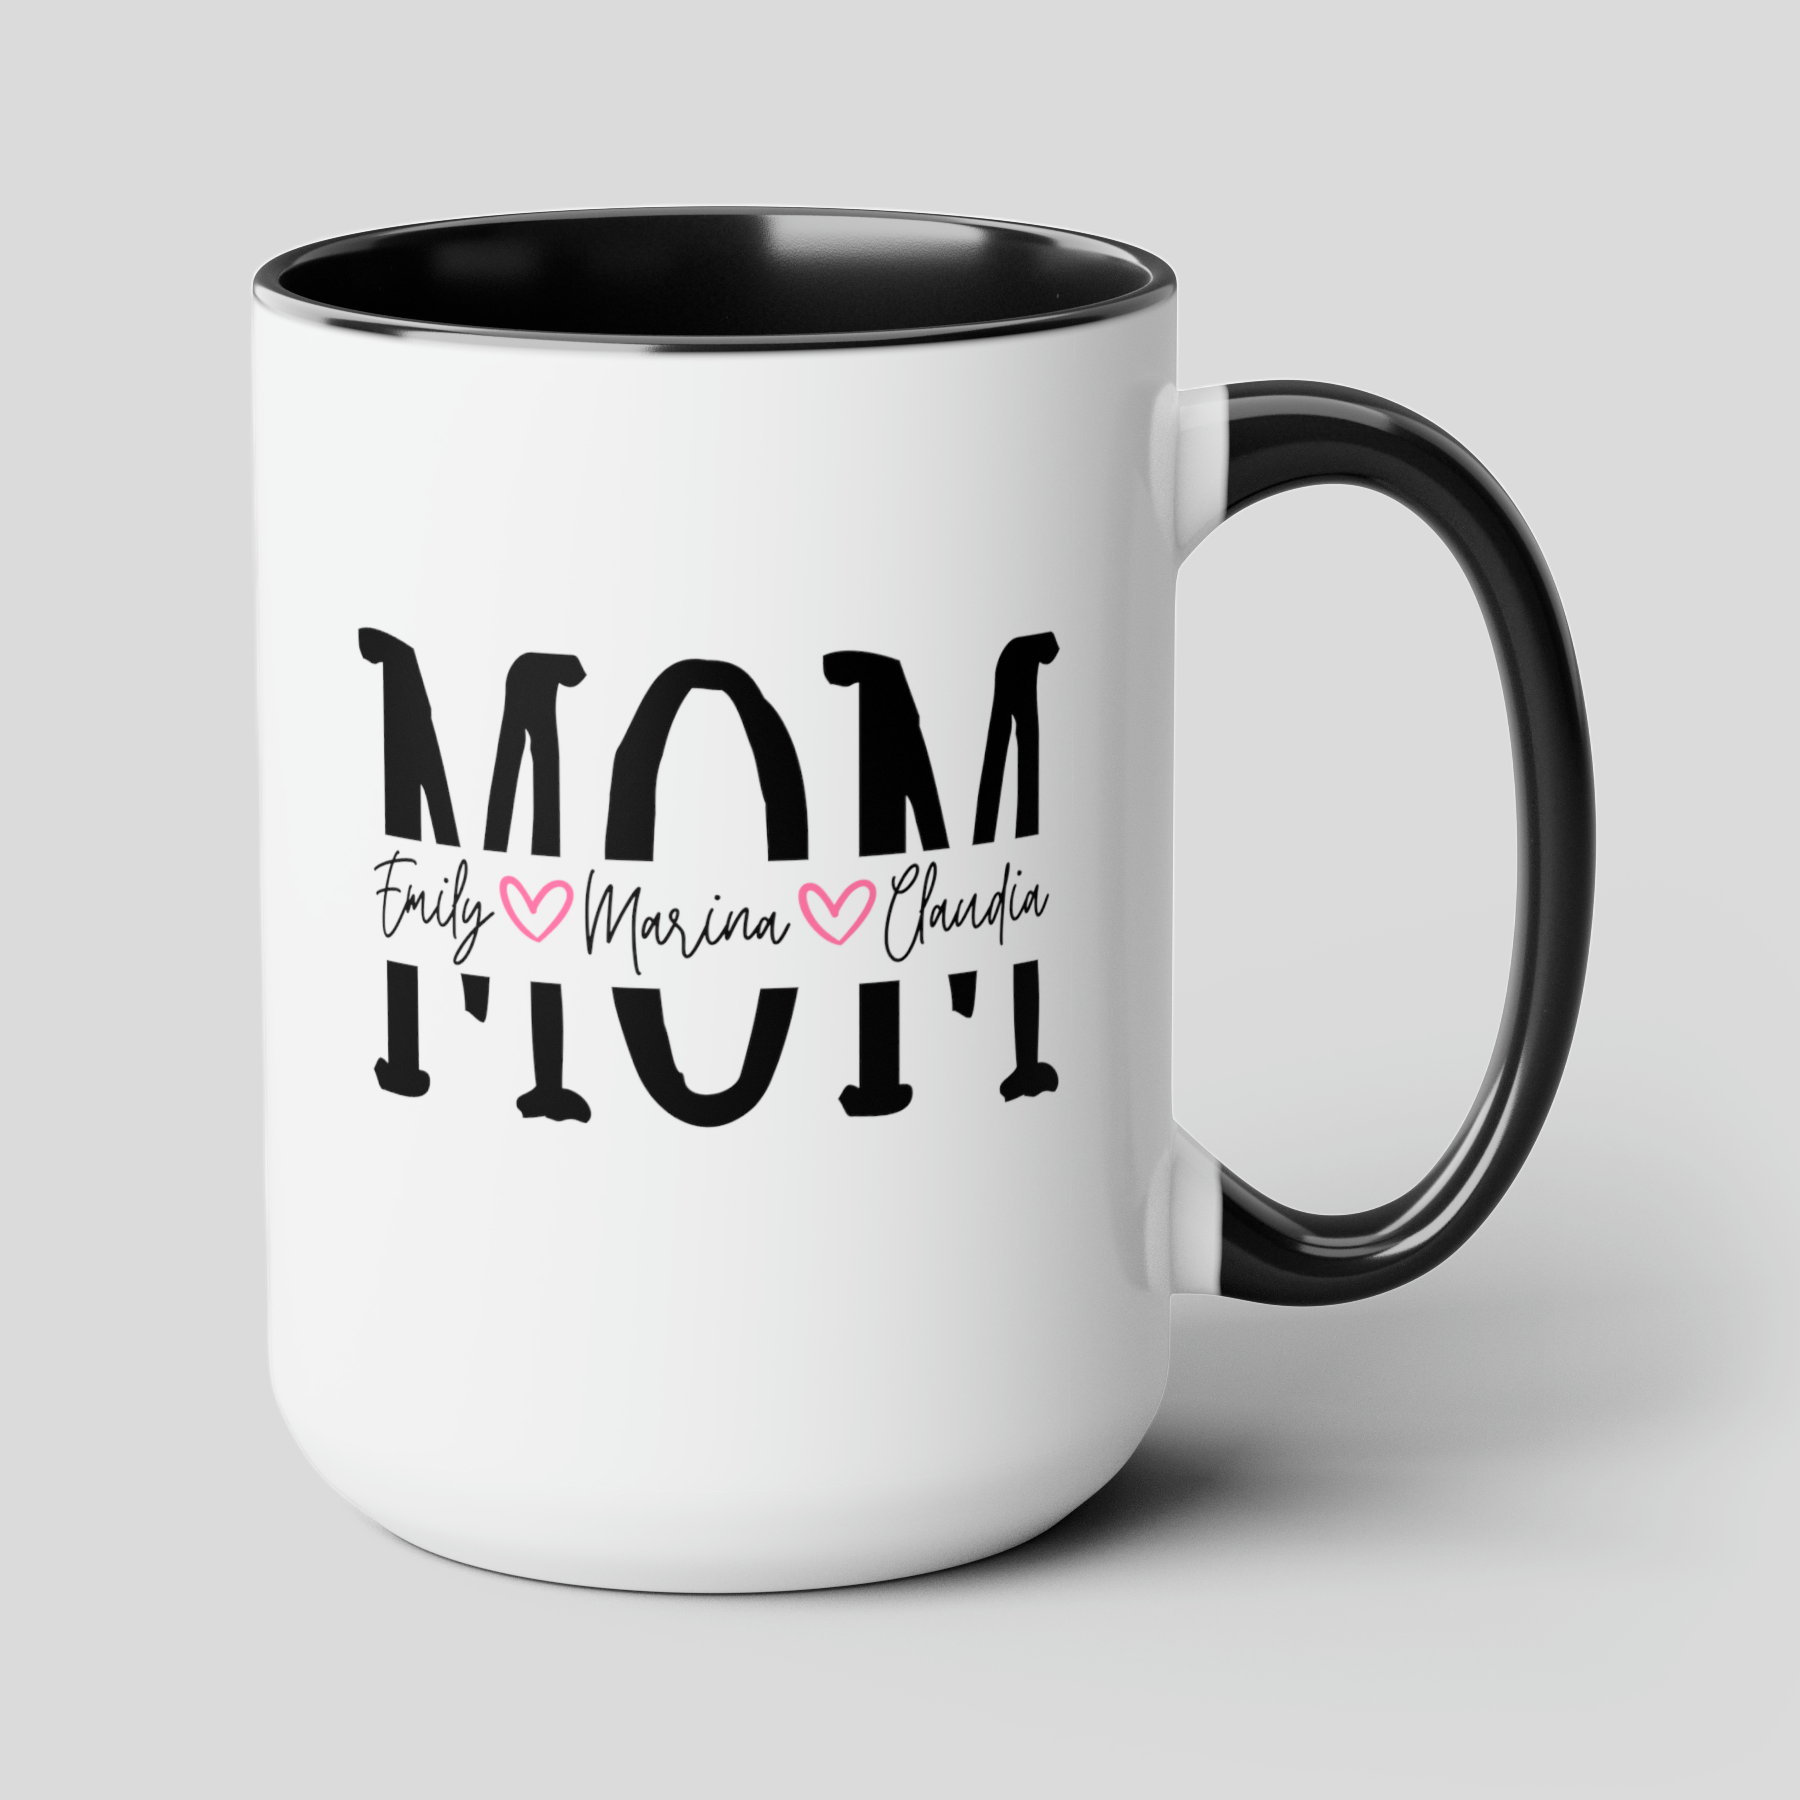 Mom With Kids' Names 15oz white with black accent funny large coffee mug gift for mother's day son daughter heart personalize custom waveywares wavey wares wavywares wavy wares cover